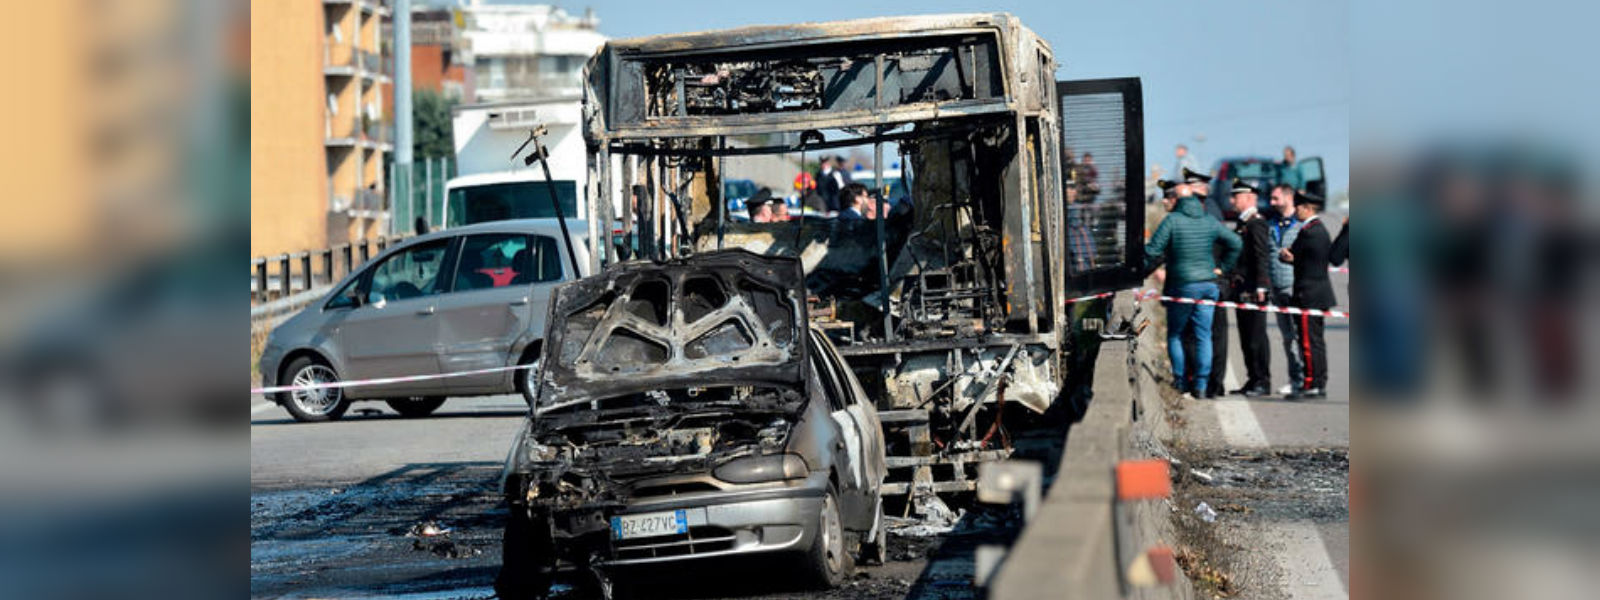 Italian school bus driver sets the vehicle on fire